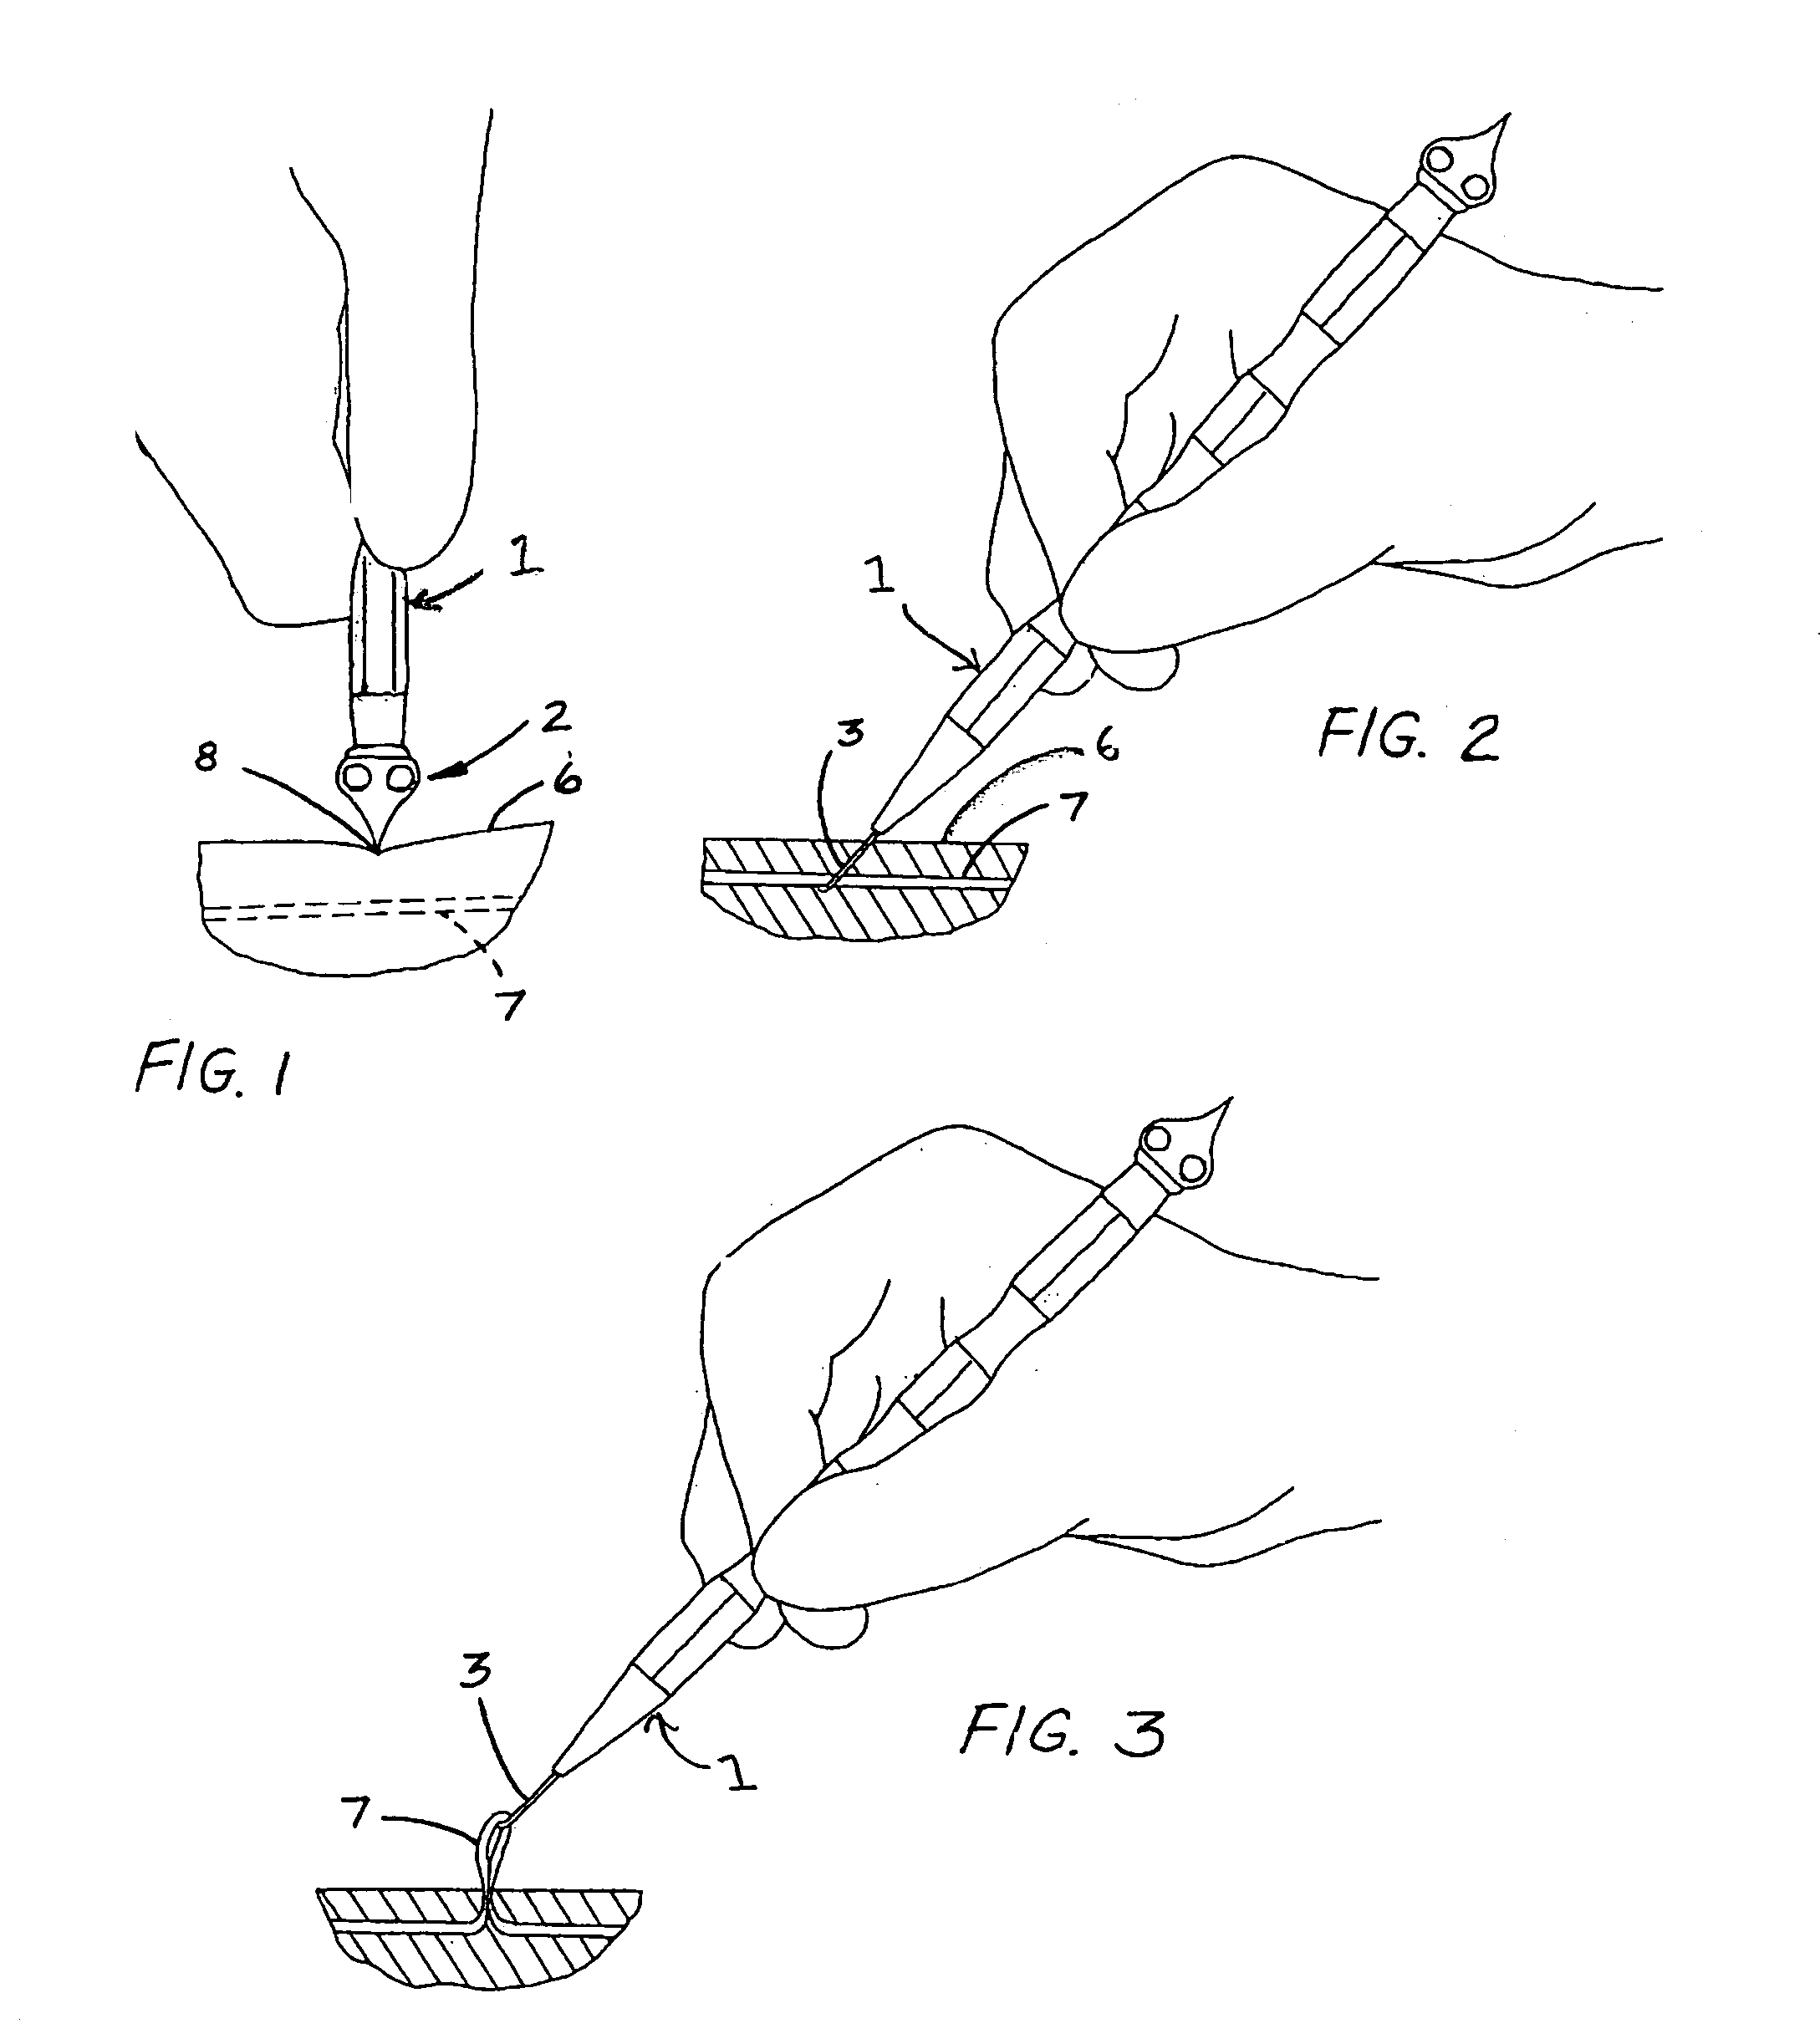 Surgical tool for treating varicose veins